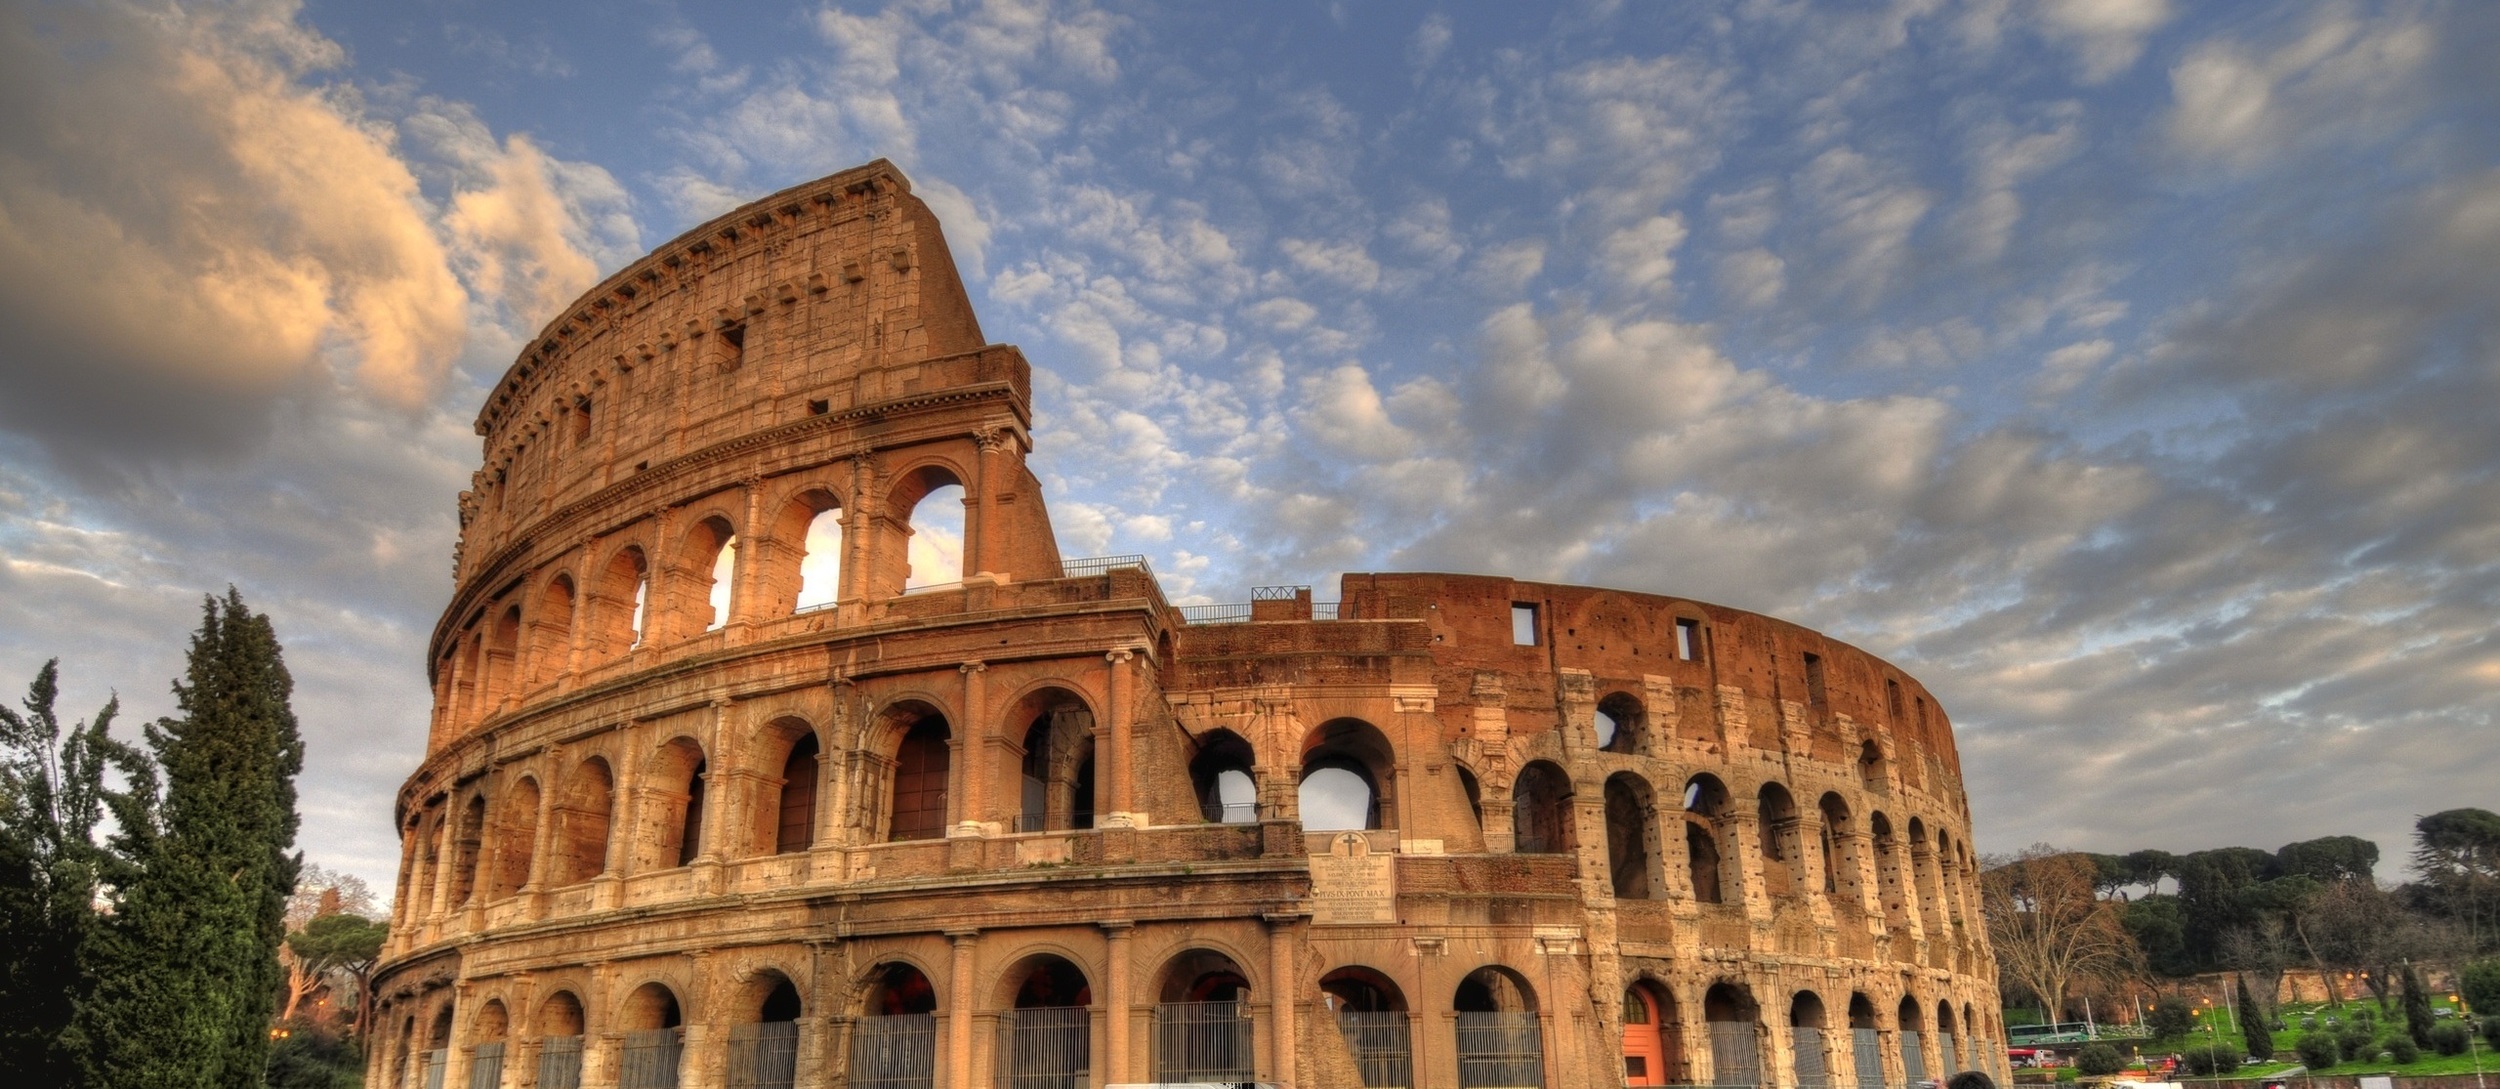 30 Colosseum HD Wallpapers and Backgrounds